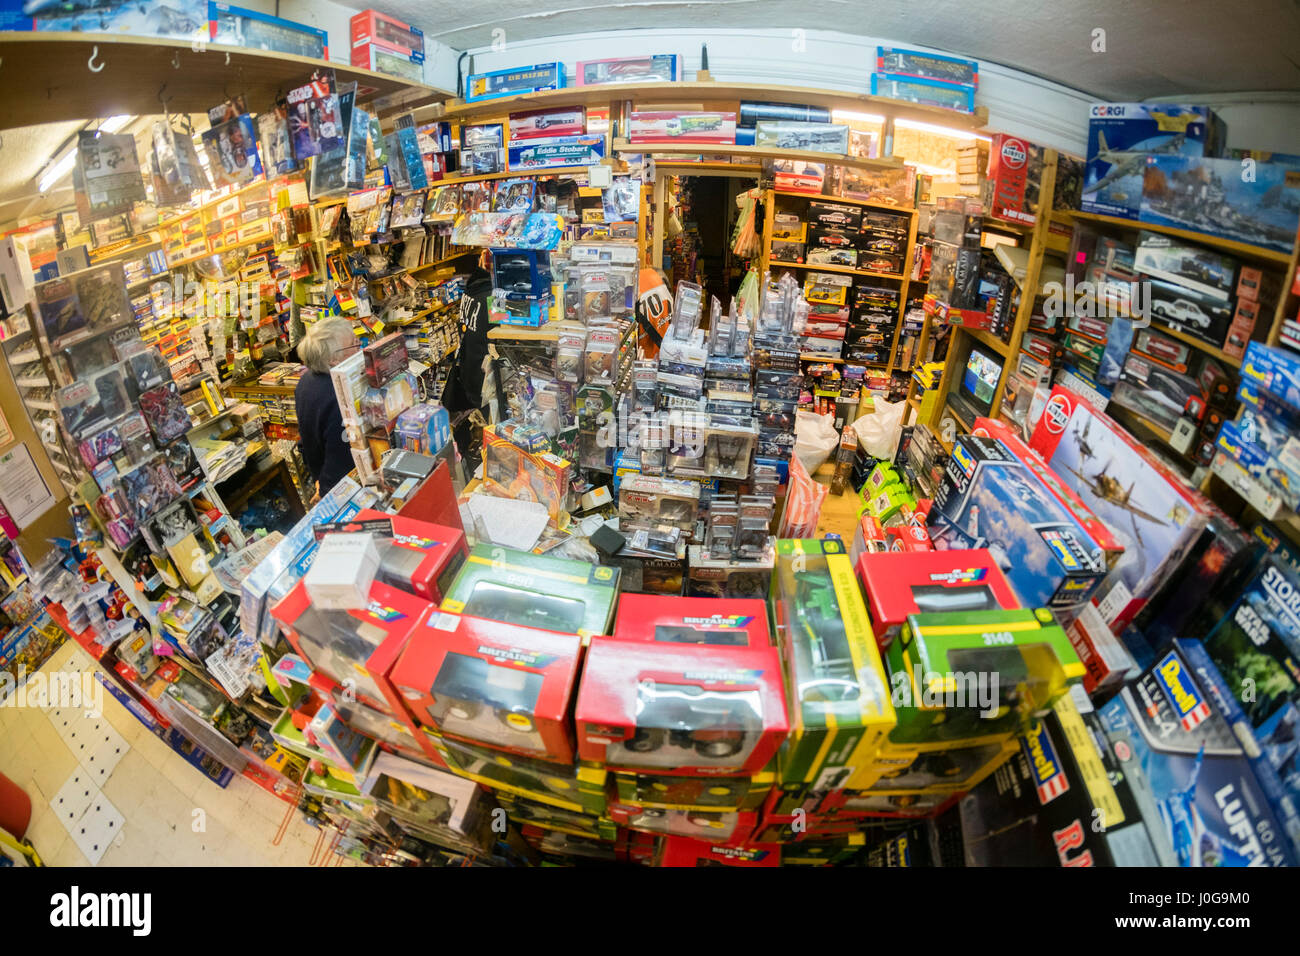 The interior of  'The Albatross' traditional old-fashioned  toy, hobby  and model shop, Aberystwyth Wales UK Stock Photo